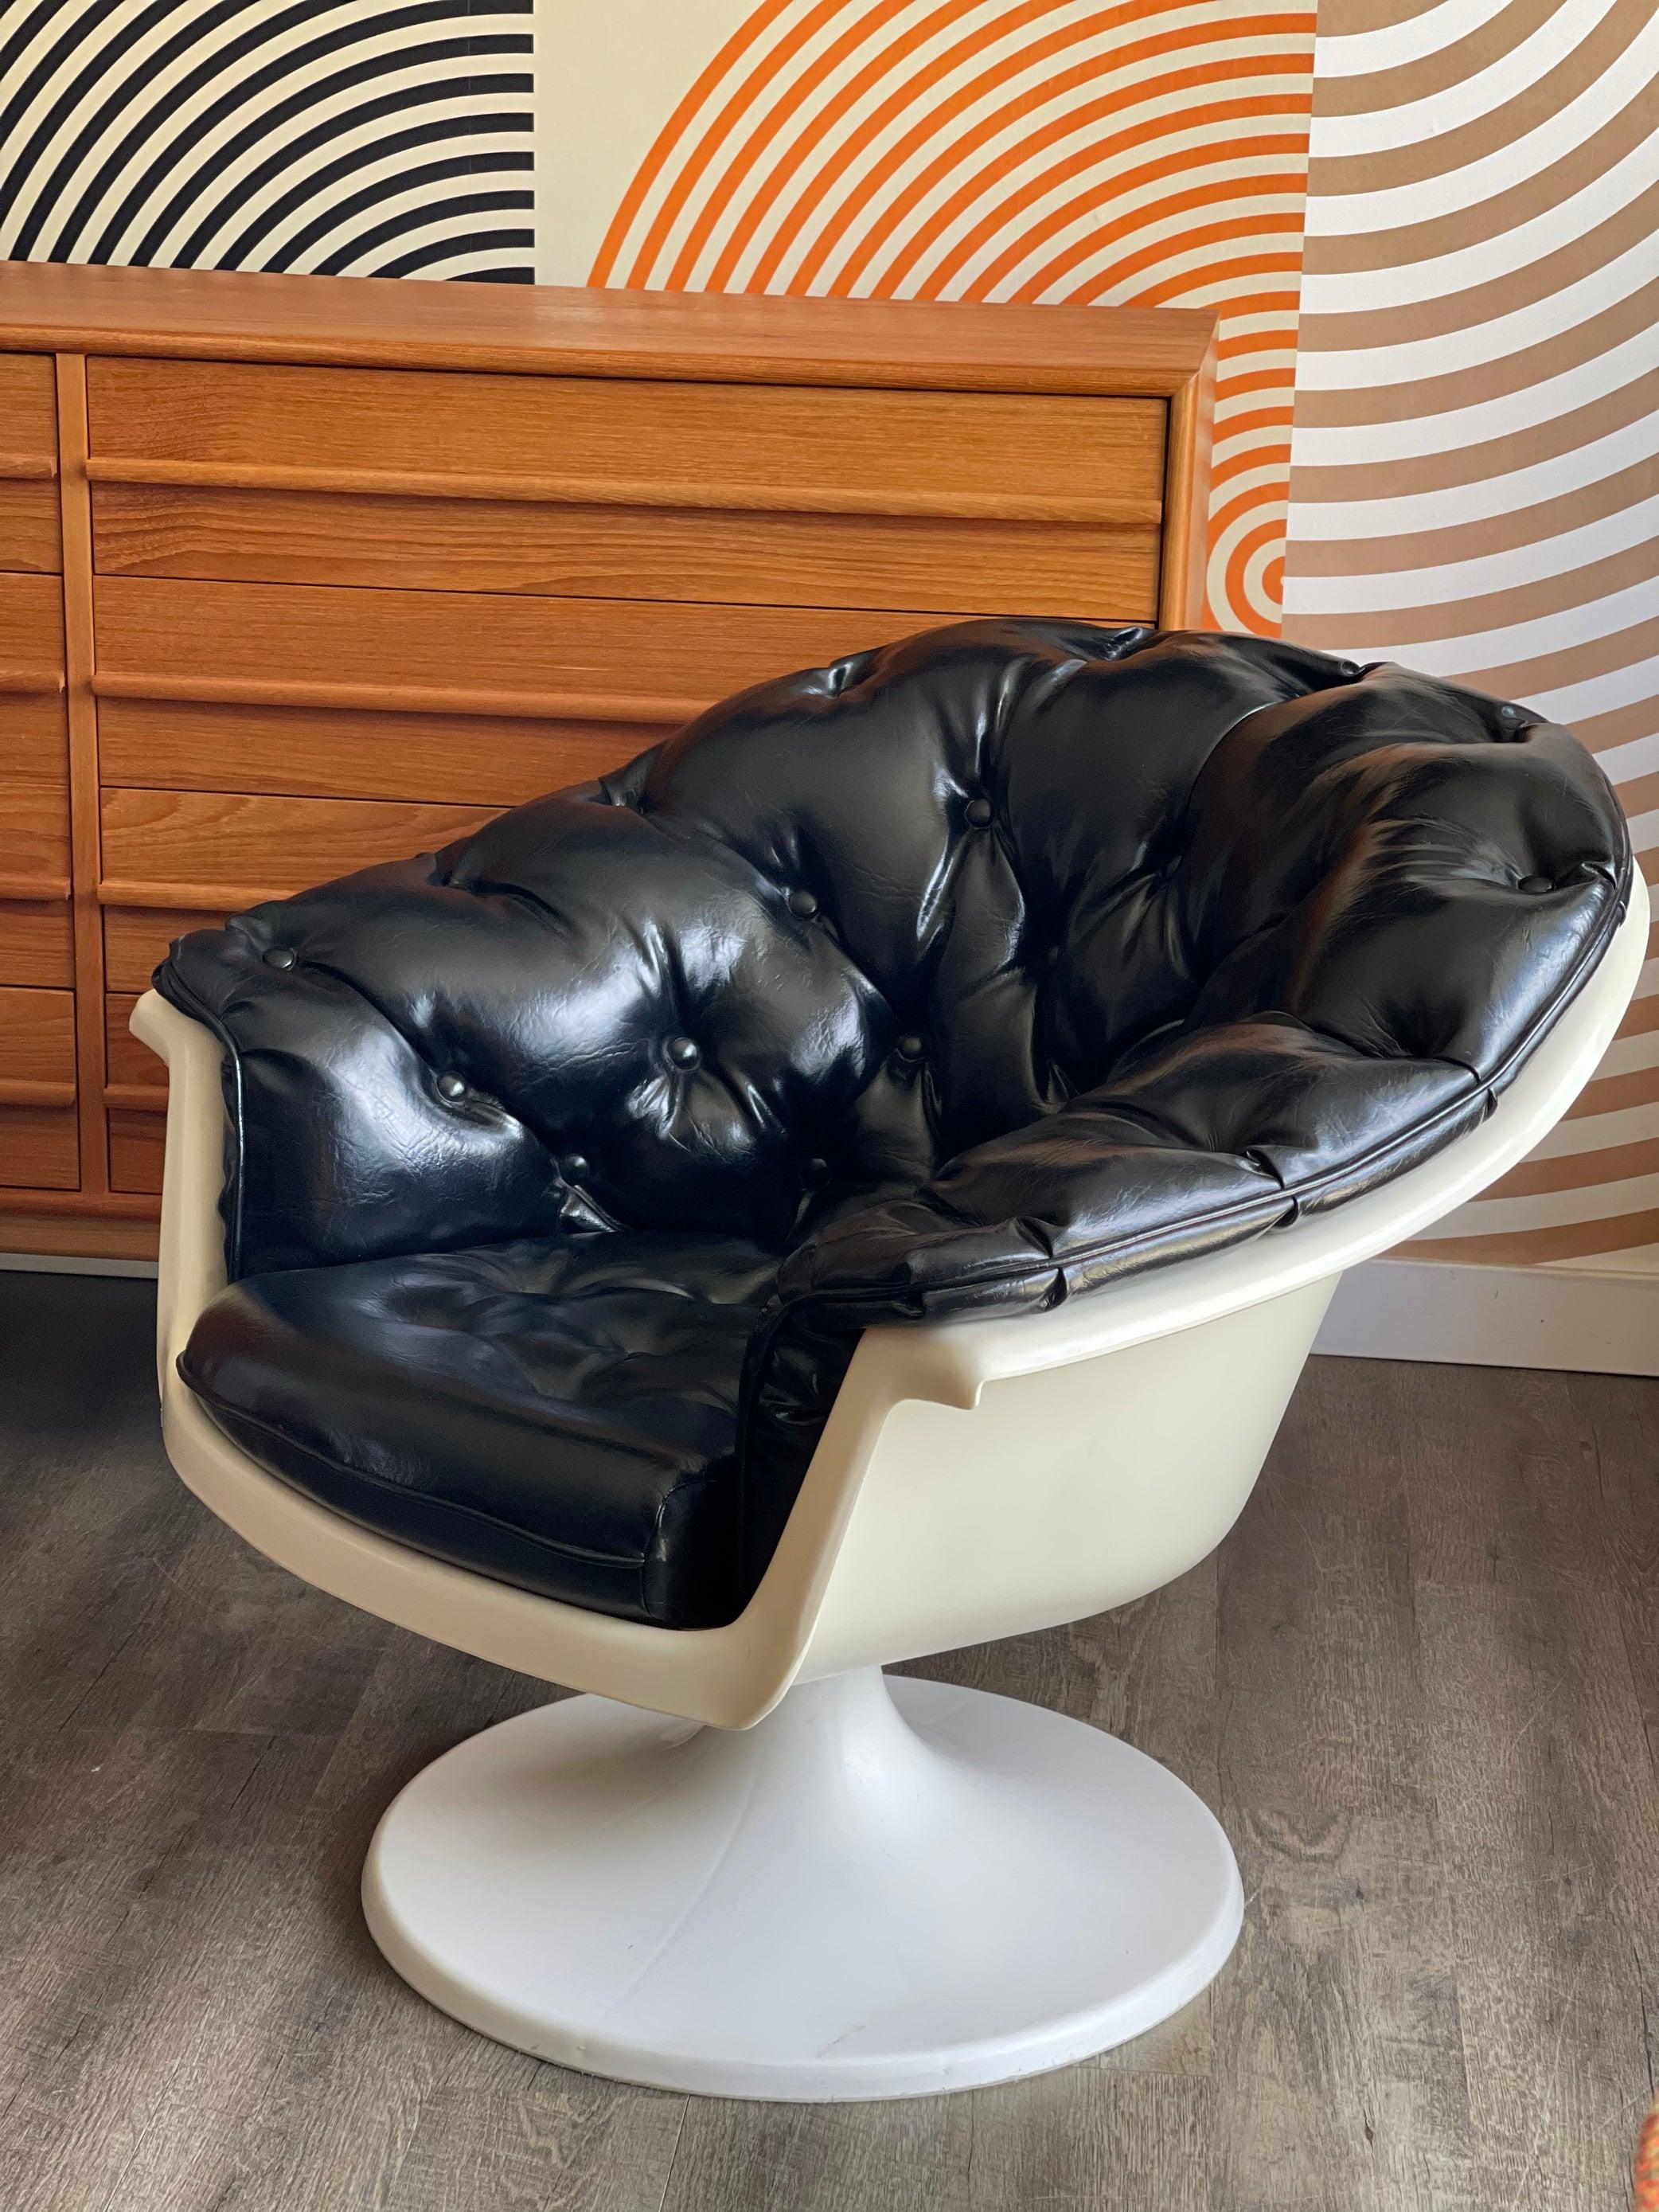 This space age lounge chair with a tulip base is in great vintage condition. The frame doesn't have any cracks or chips. The tufted vinyl upholstery is also in good condition. 

